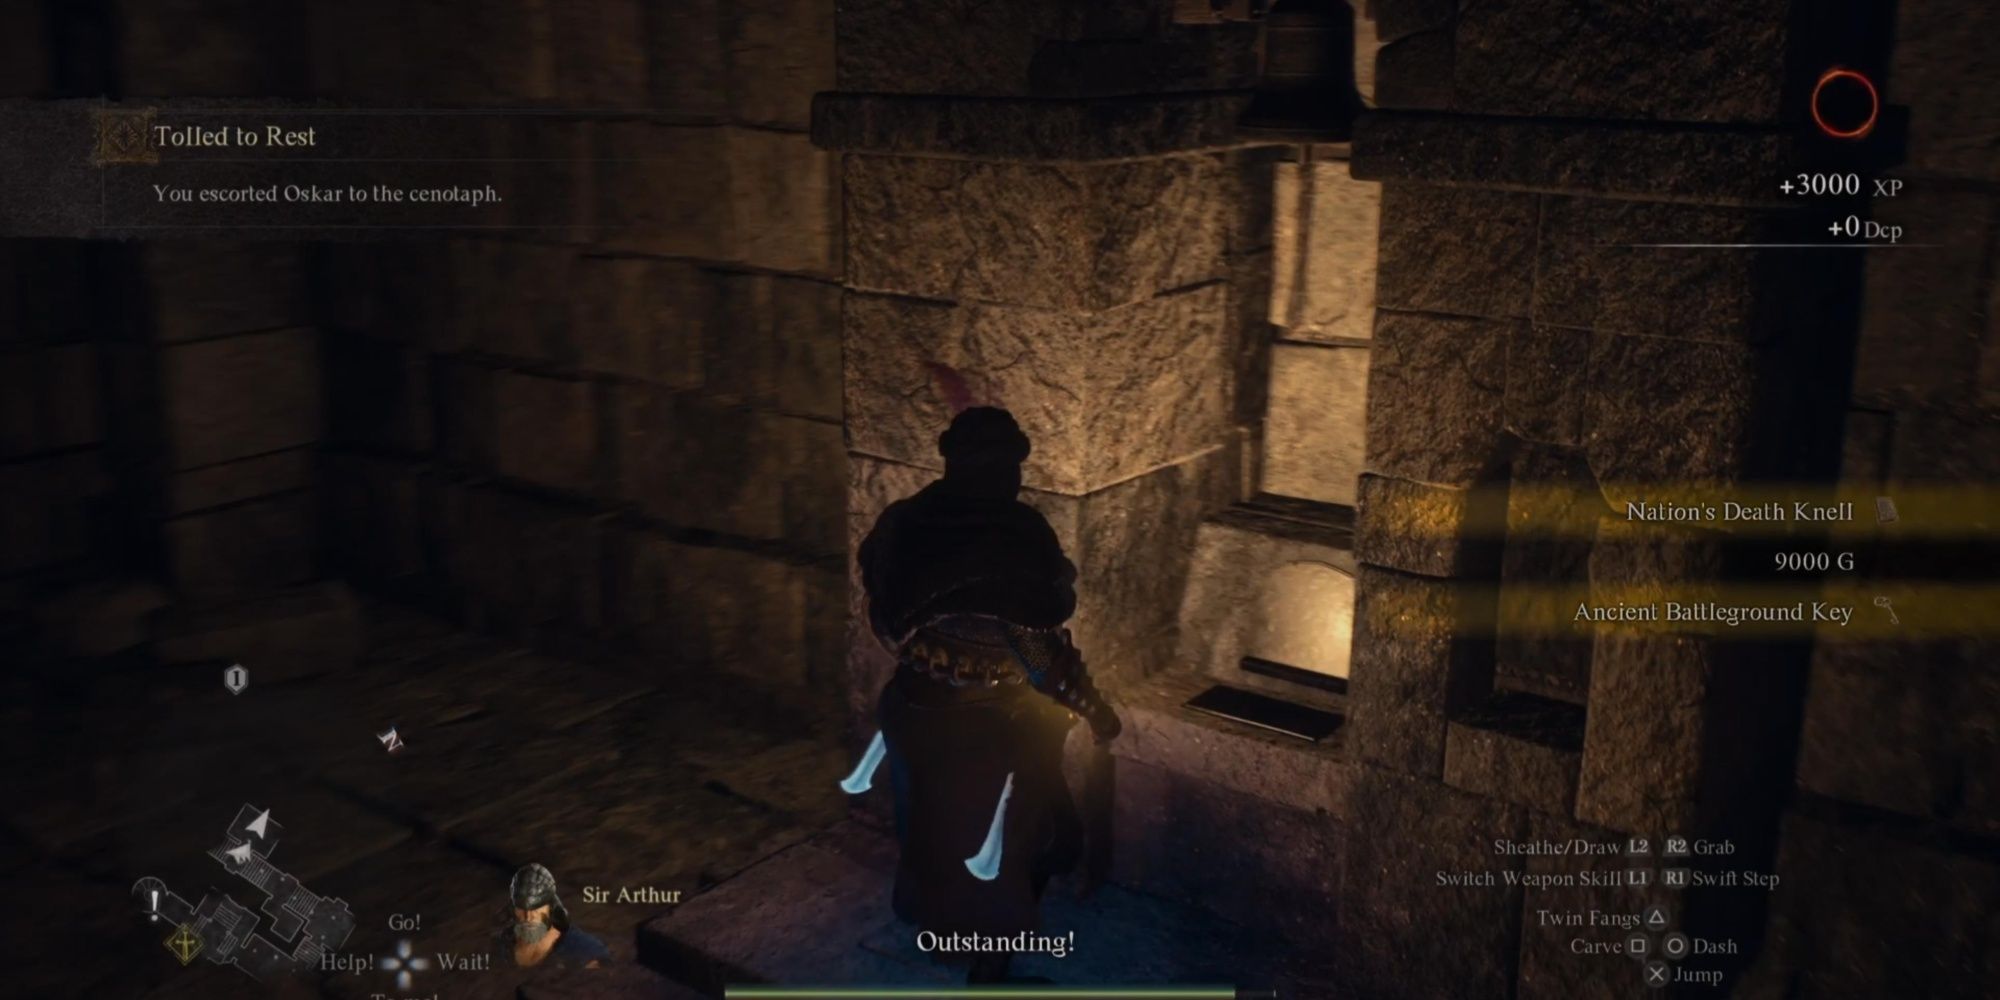 Tolled to Rest Rewards in Dragons's Dogma 2